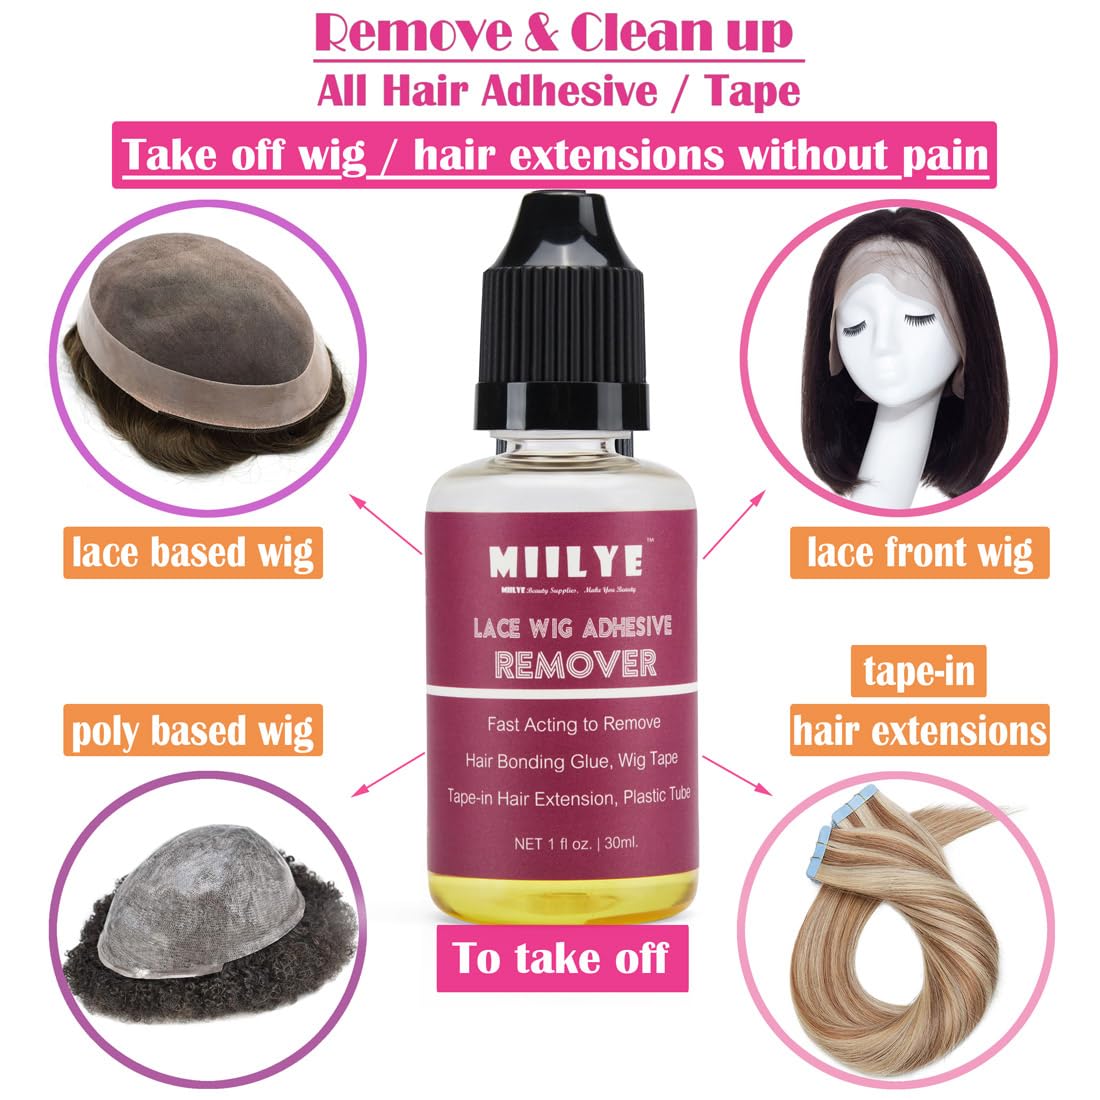 MIILYE Wig Glue for Front Lace Wig and Lace Glue Remover Set, Invisible Waterproof Hair Replacement Bonding Glue + Solvent + Lace Melting Band + Glue Application Brush